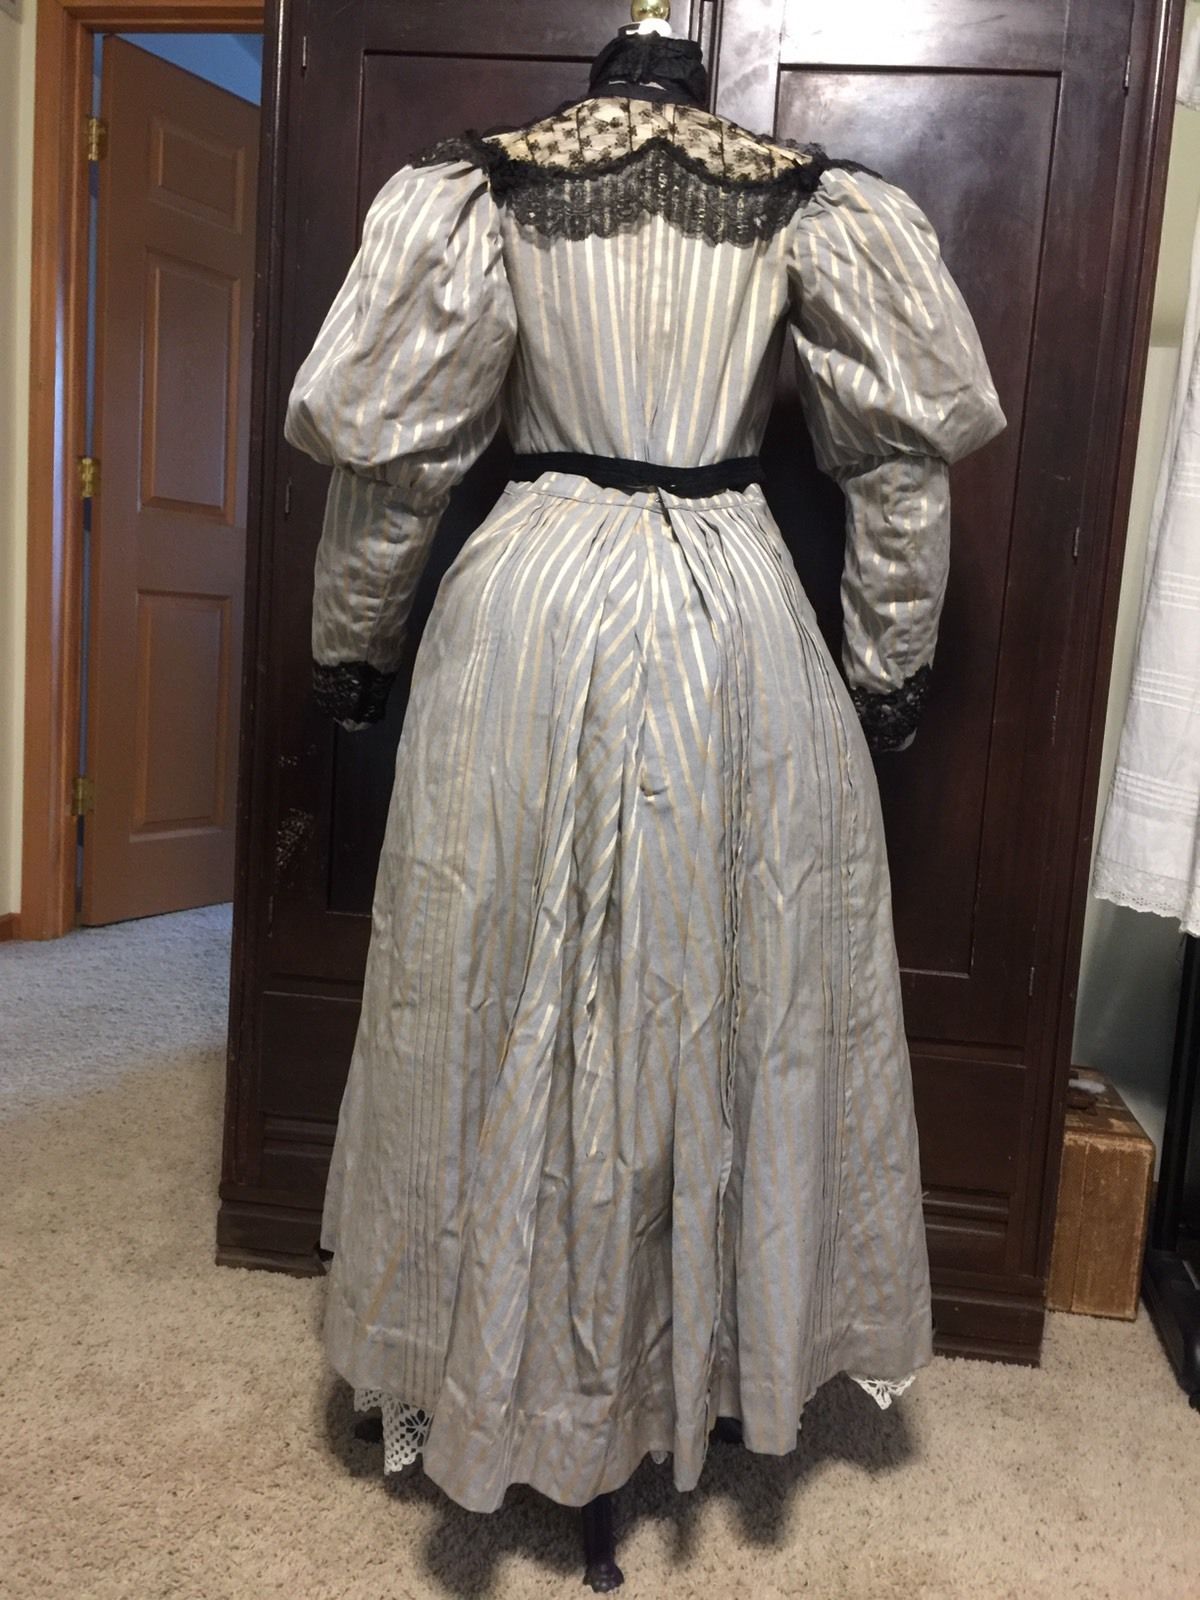 All The Pretty Dresses: 1890's Day Dress